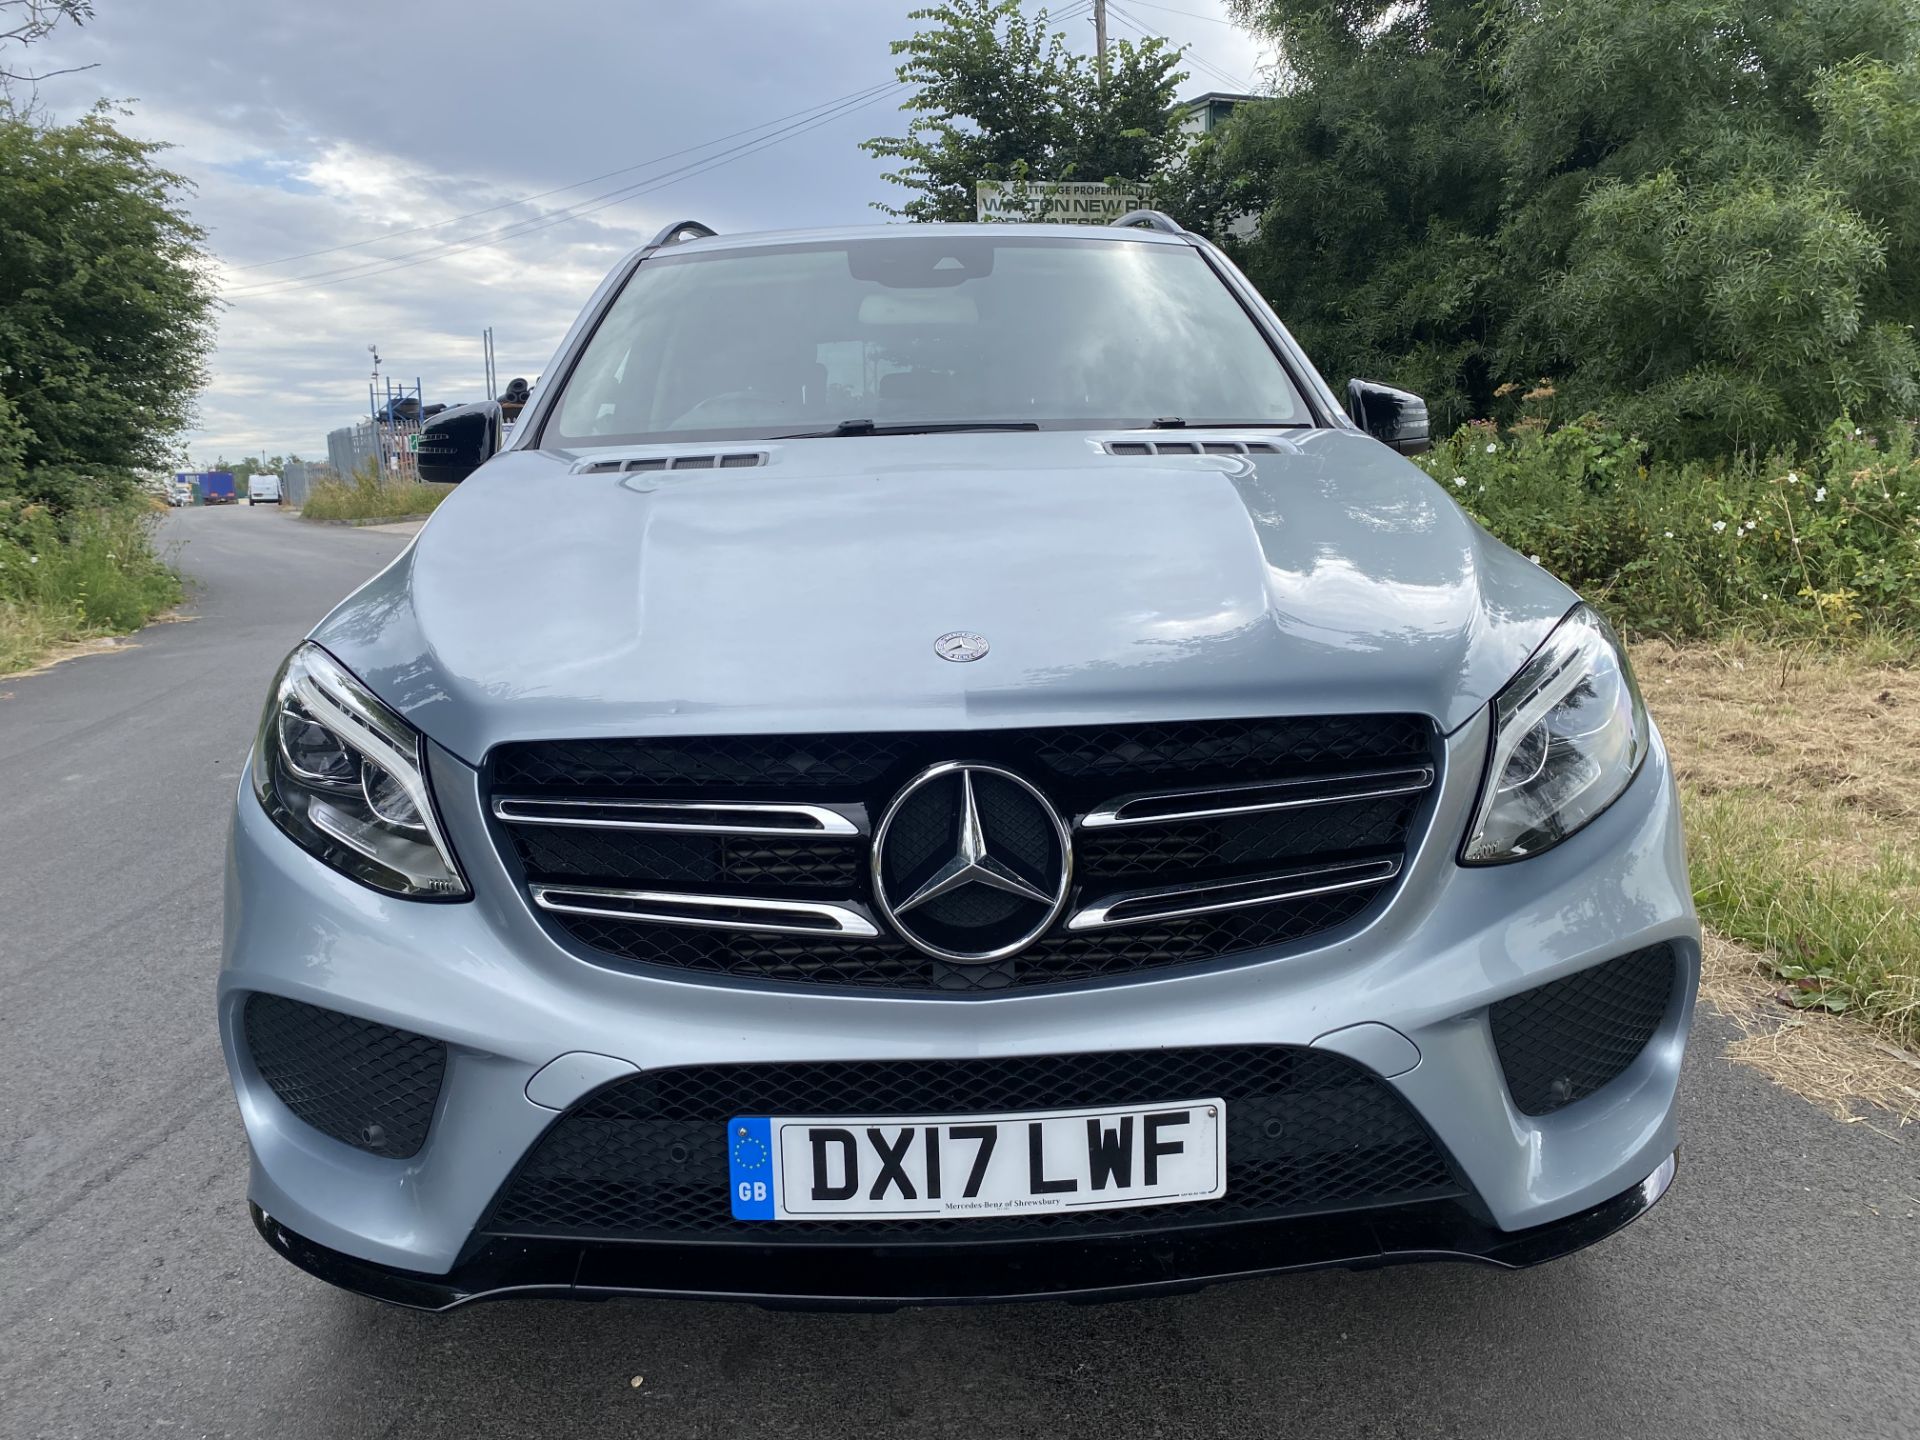 MERCEDES GLE 250d AMG-LINE "NIGHT EDITION" AUTO - 17 REG - 1 OWNER - FULL LEATHER - COMAND - NO VAT! - Image 4 of 36